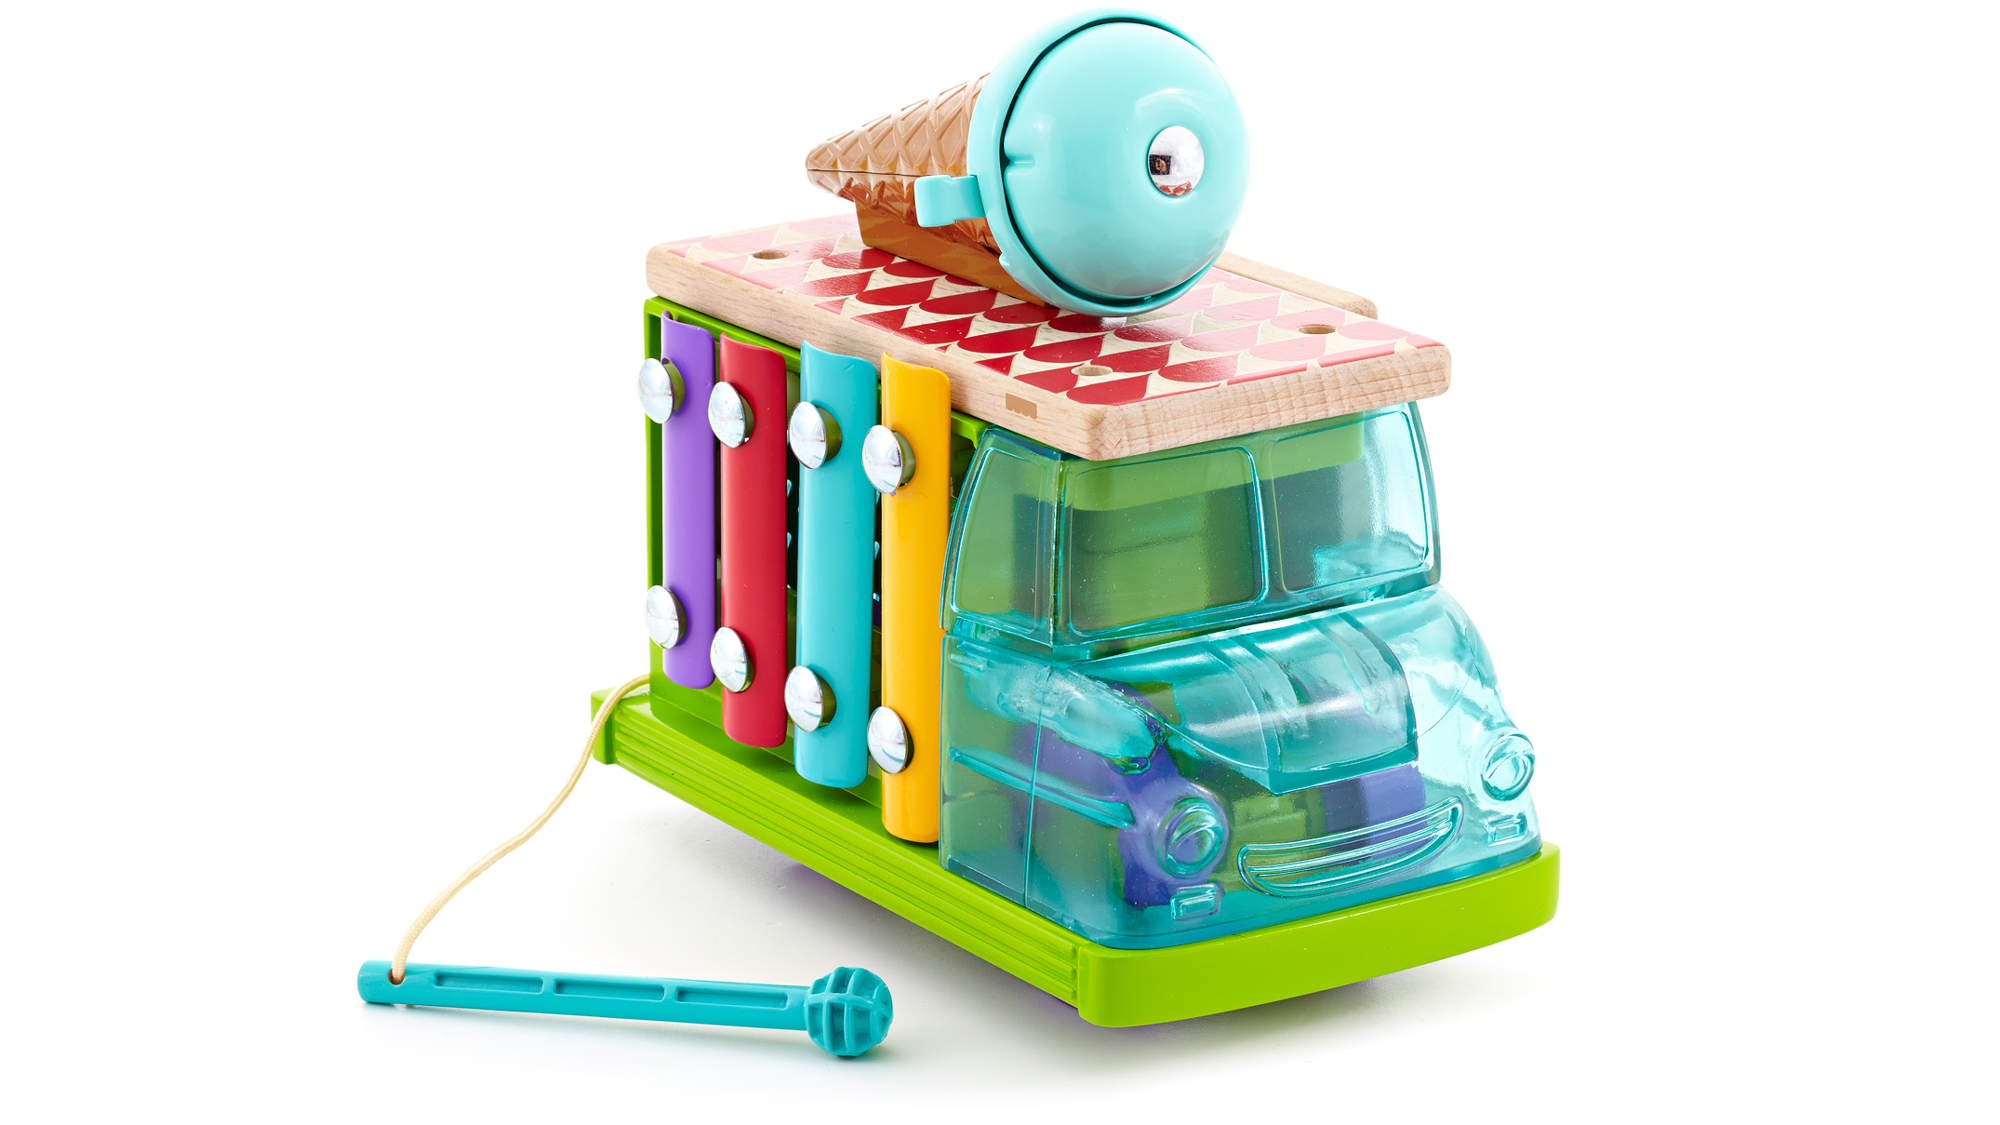 Fisher-Price’s Gorgeous New Wooden Toy Line Will Make You Want To Have Kids